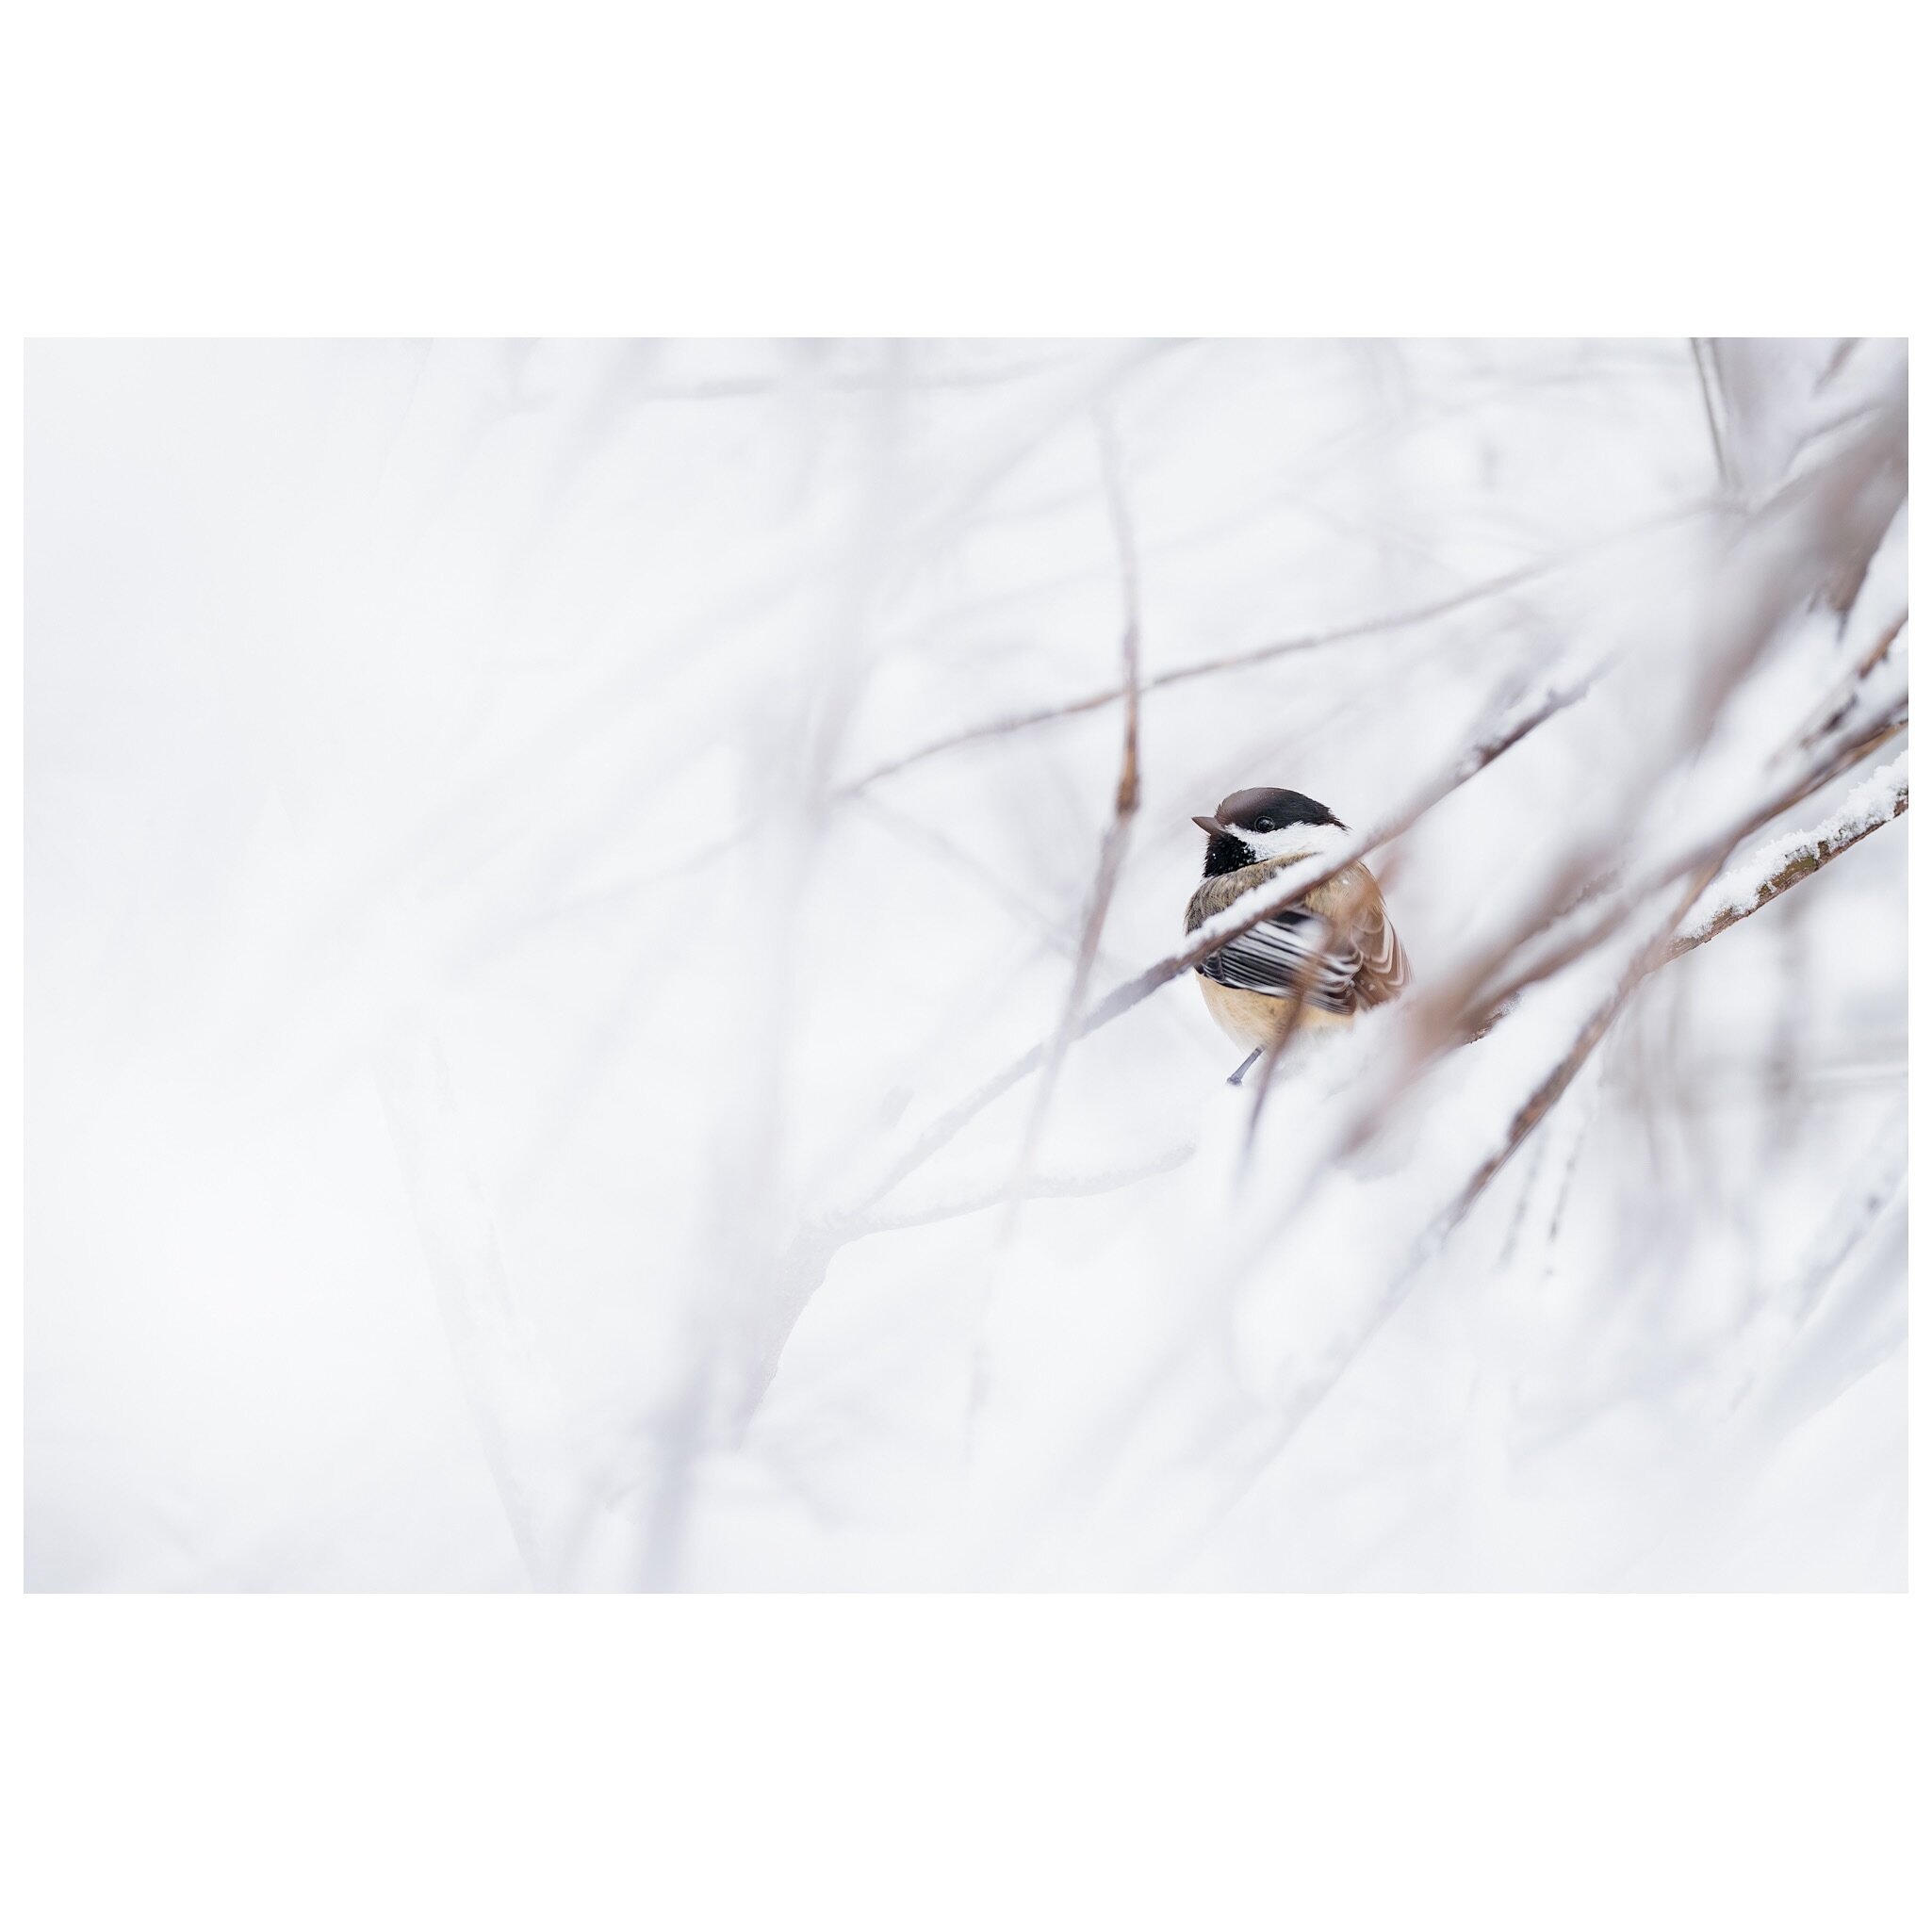 I think it&rsquo;s time for some sunshine ☀️ 

#snow #newhampshire #chickadee #nhphotographer